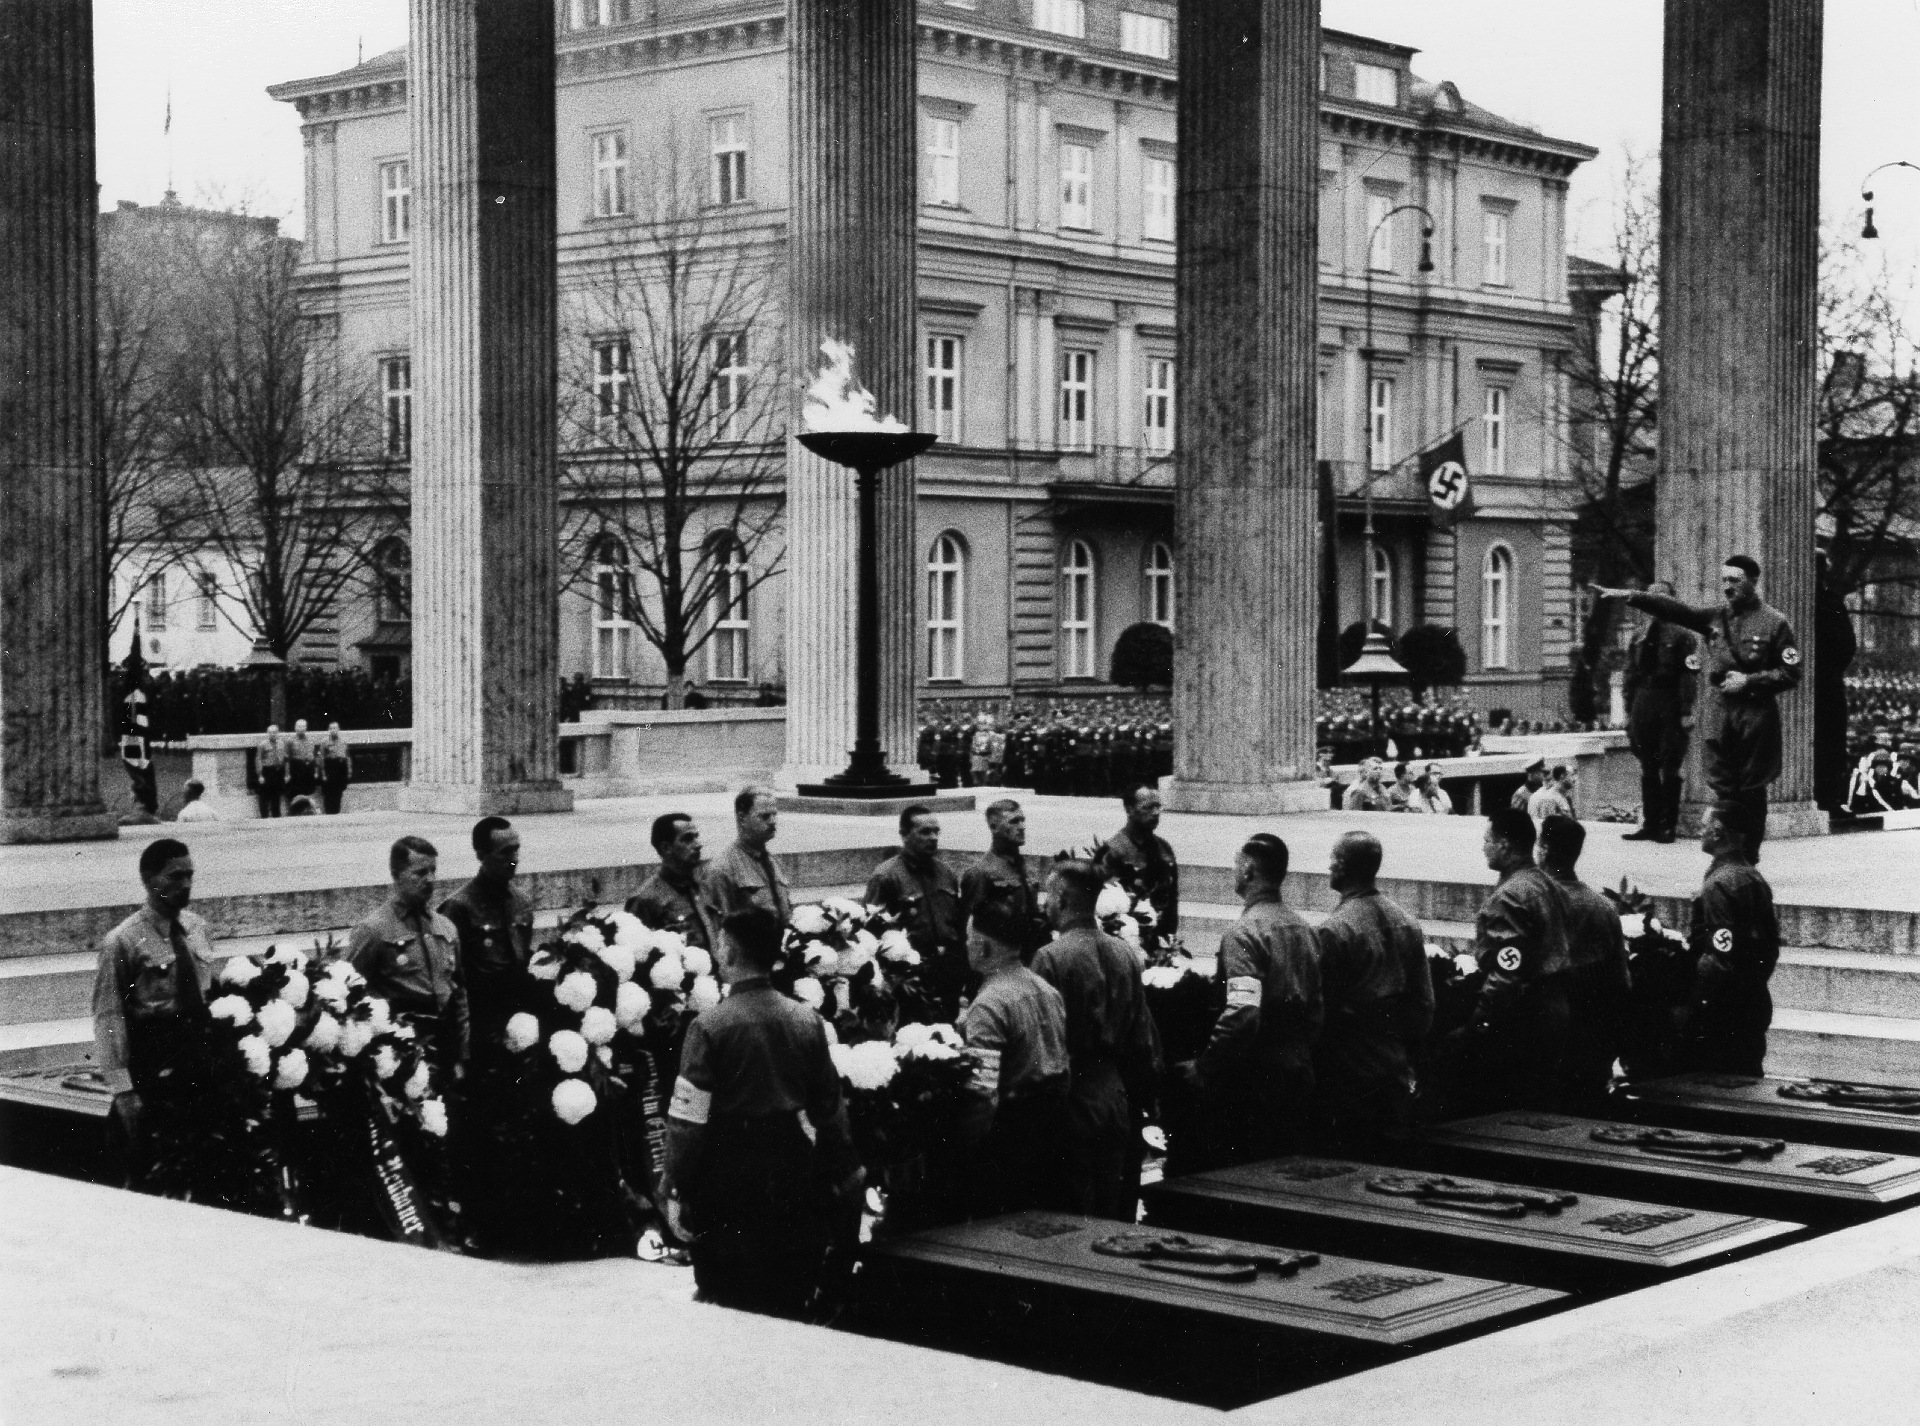 Adolf Hitler and a number of SA men in one of the “Temples of Honor” marking the interment of the coffins of those who died on Nov. 9, 1923. The “Brown House” can be seen in the background.